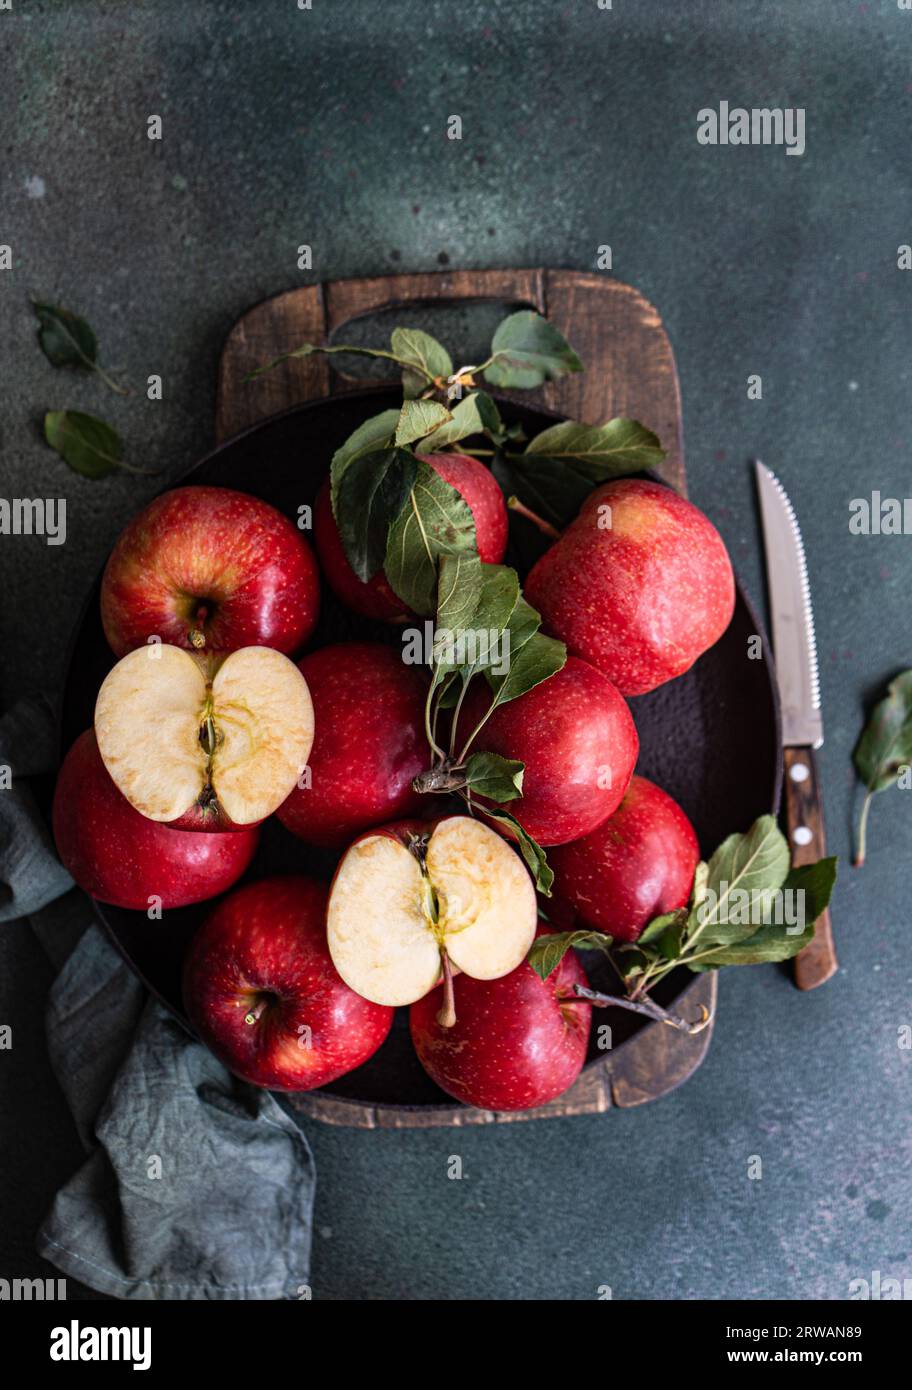 Bowl full of ripe red apples on dark back rustic table Stock Photo